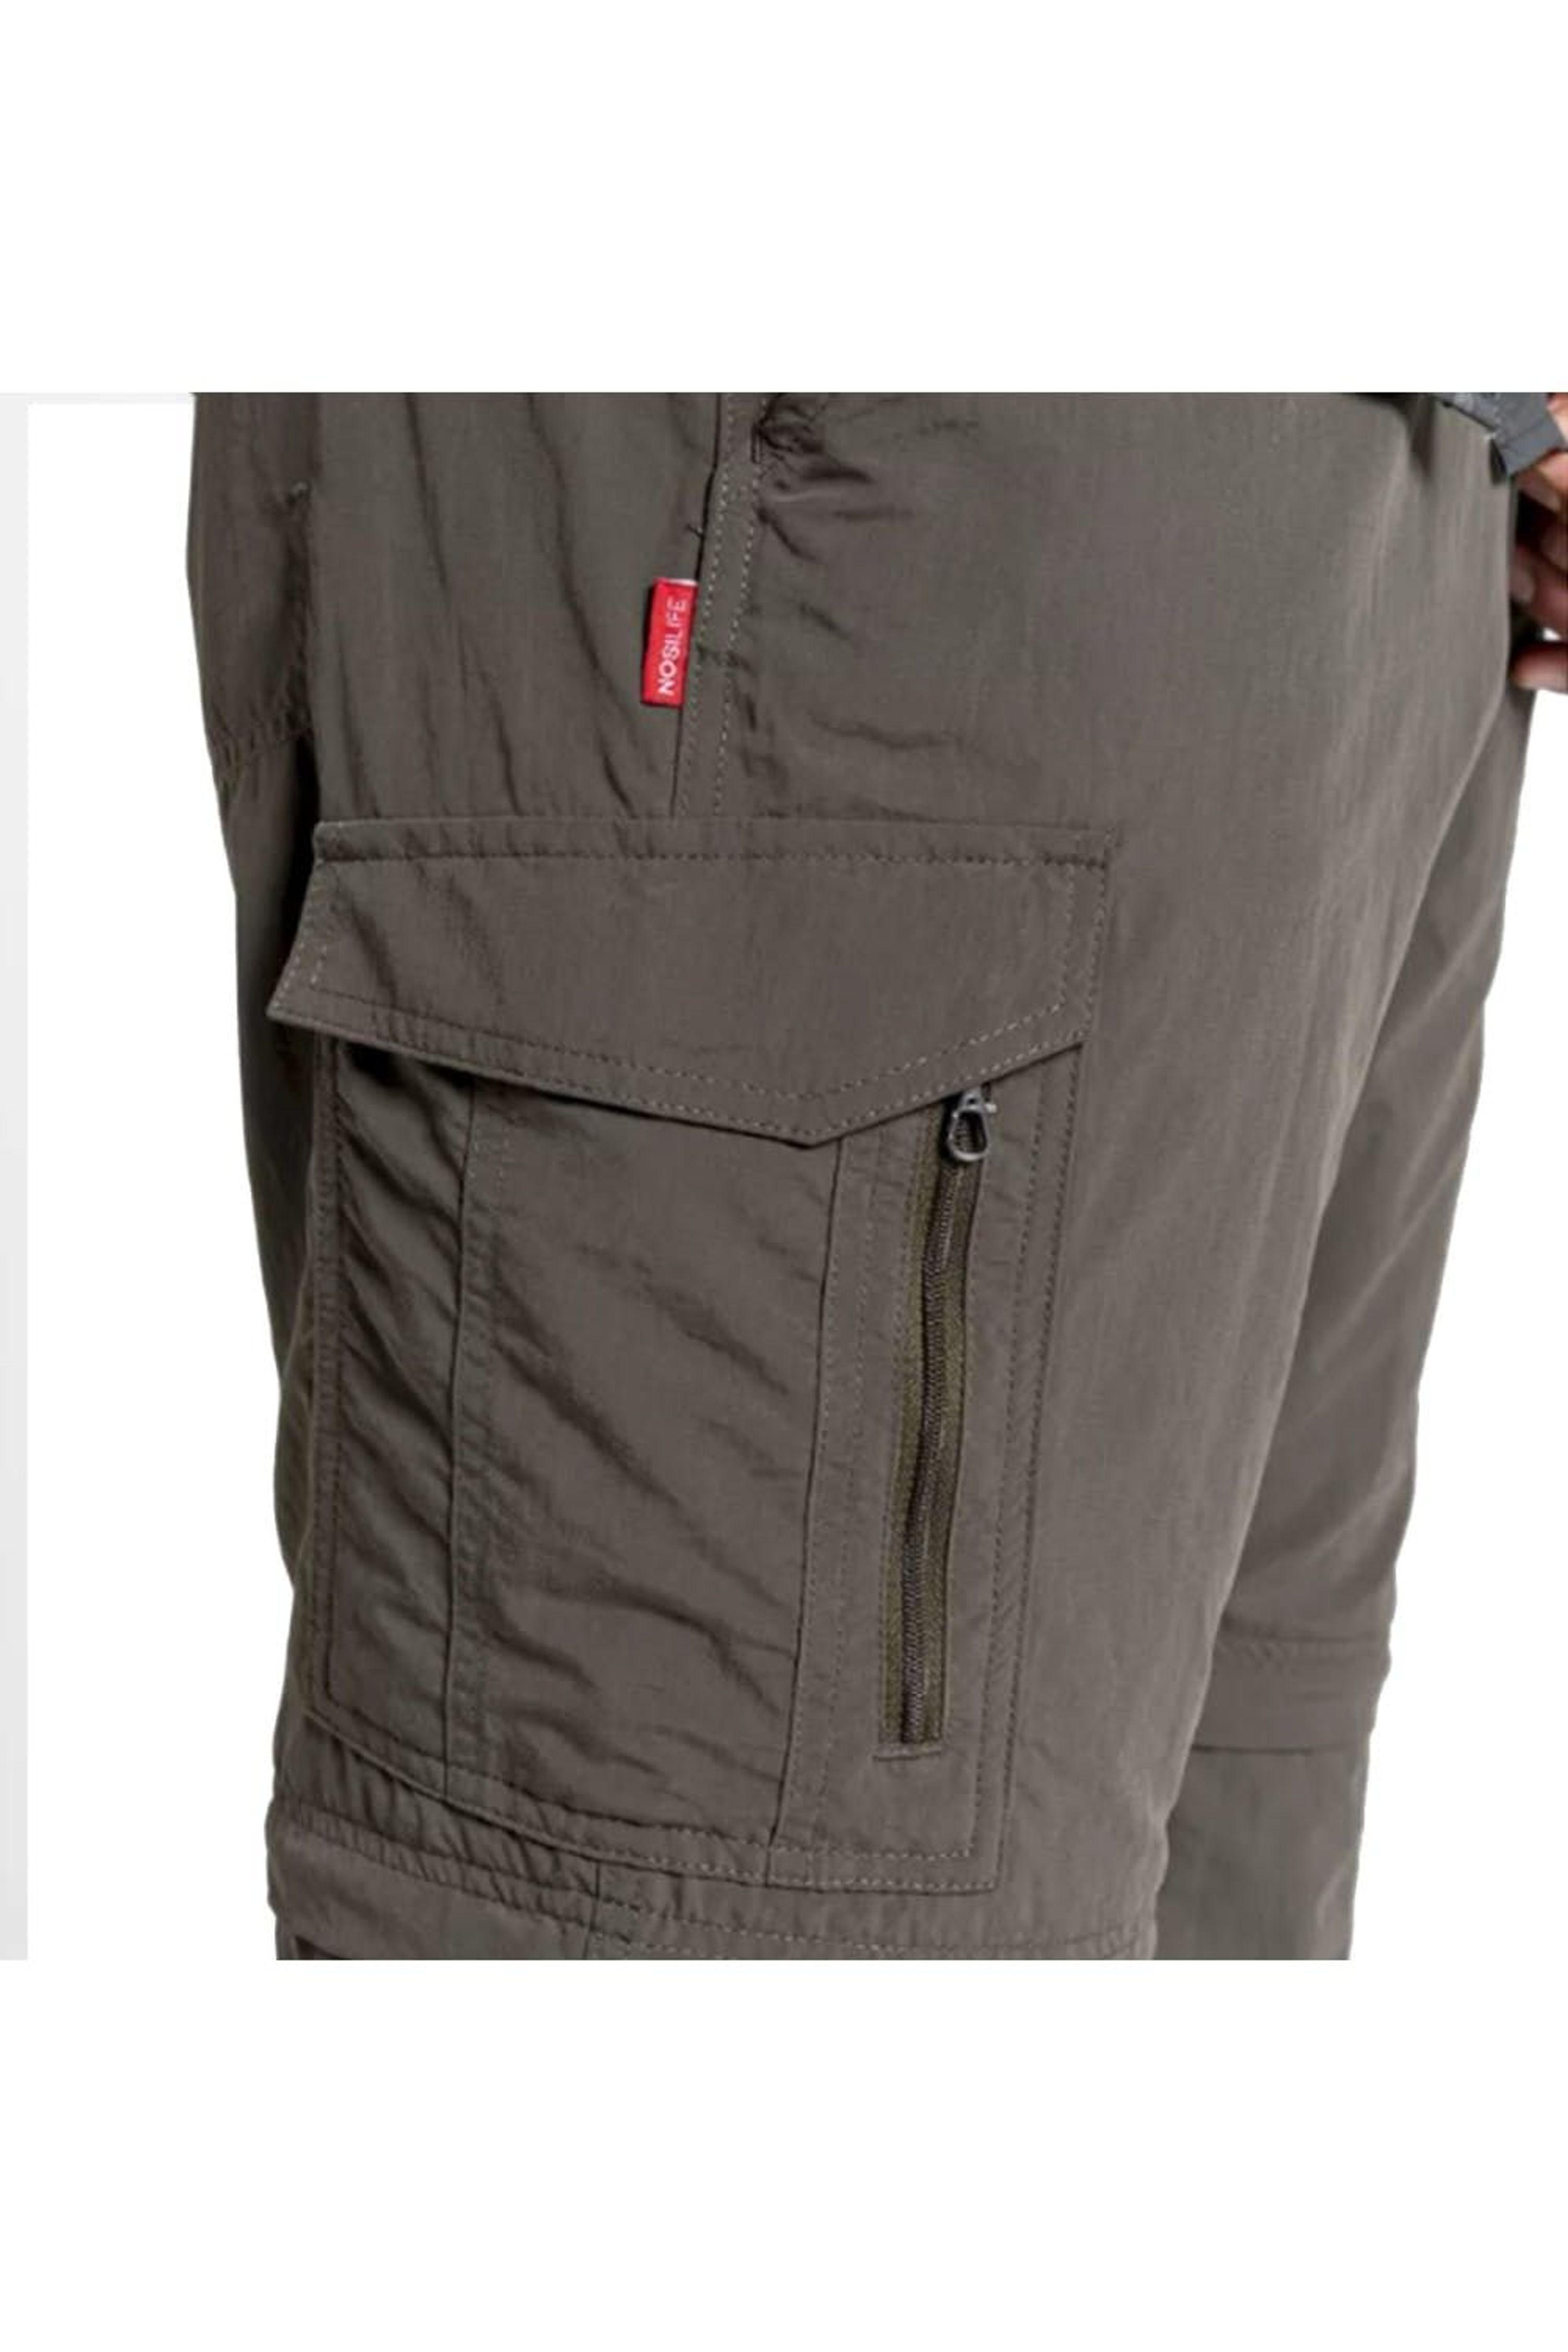 Craghoppers Trousers at GO Outdoors